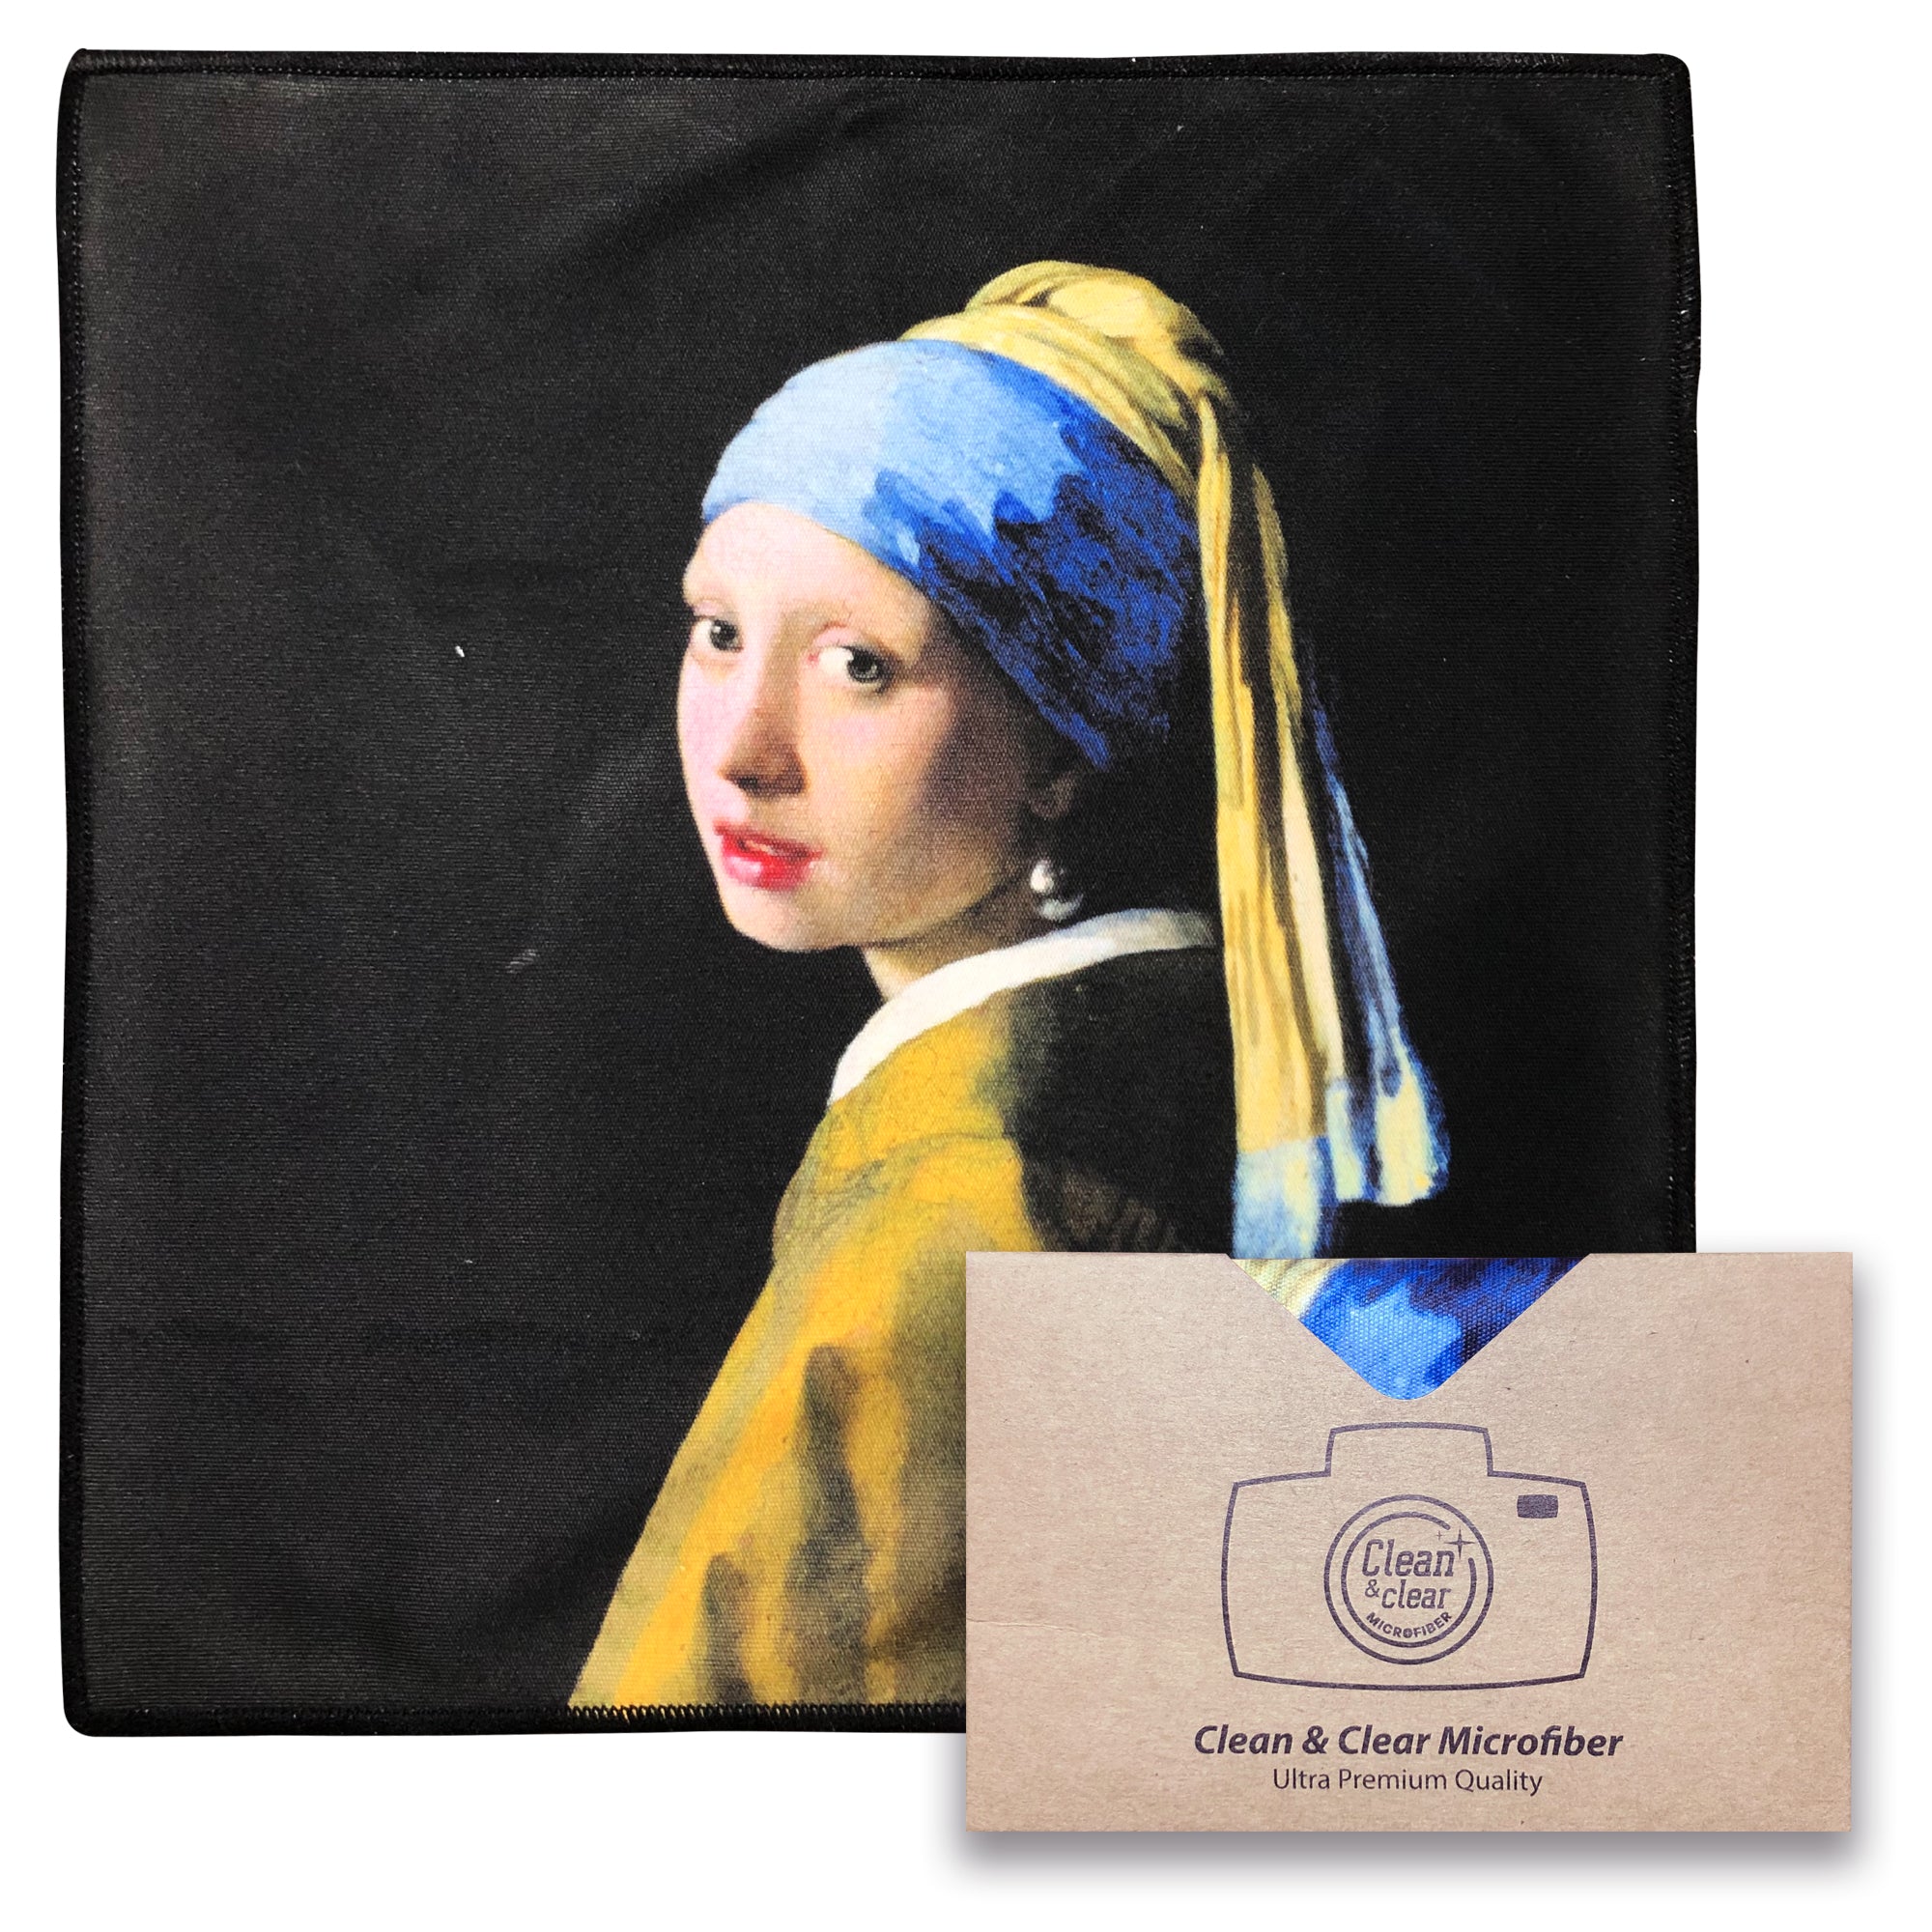 [6 Pack] Johannes Vermeer "Girl with a Pearl Earring" - Art Collection - Ultra Premium Quality Microfiber Cleaning Cloths